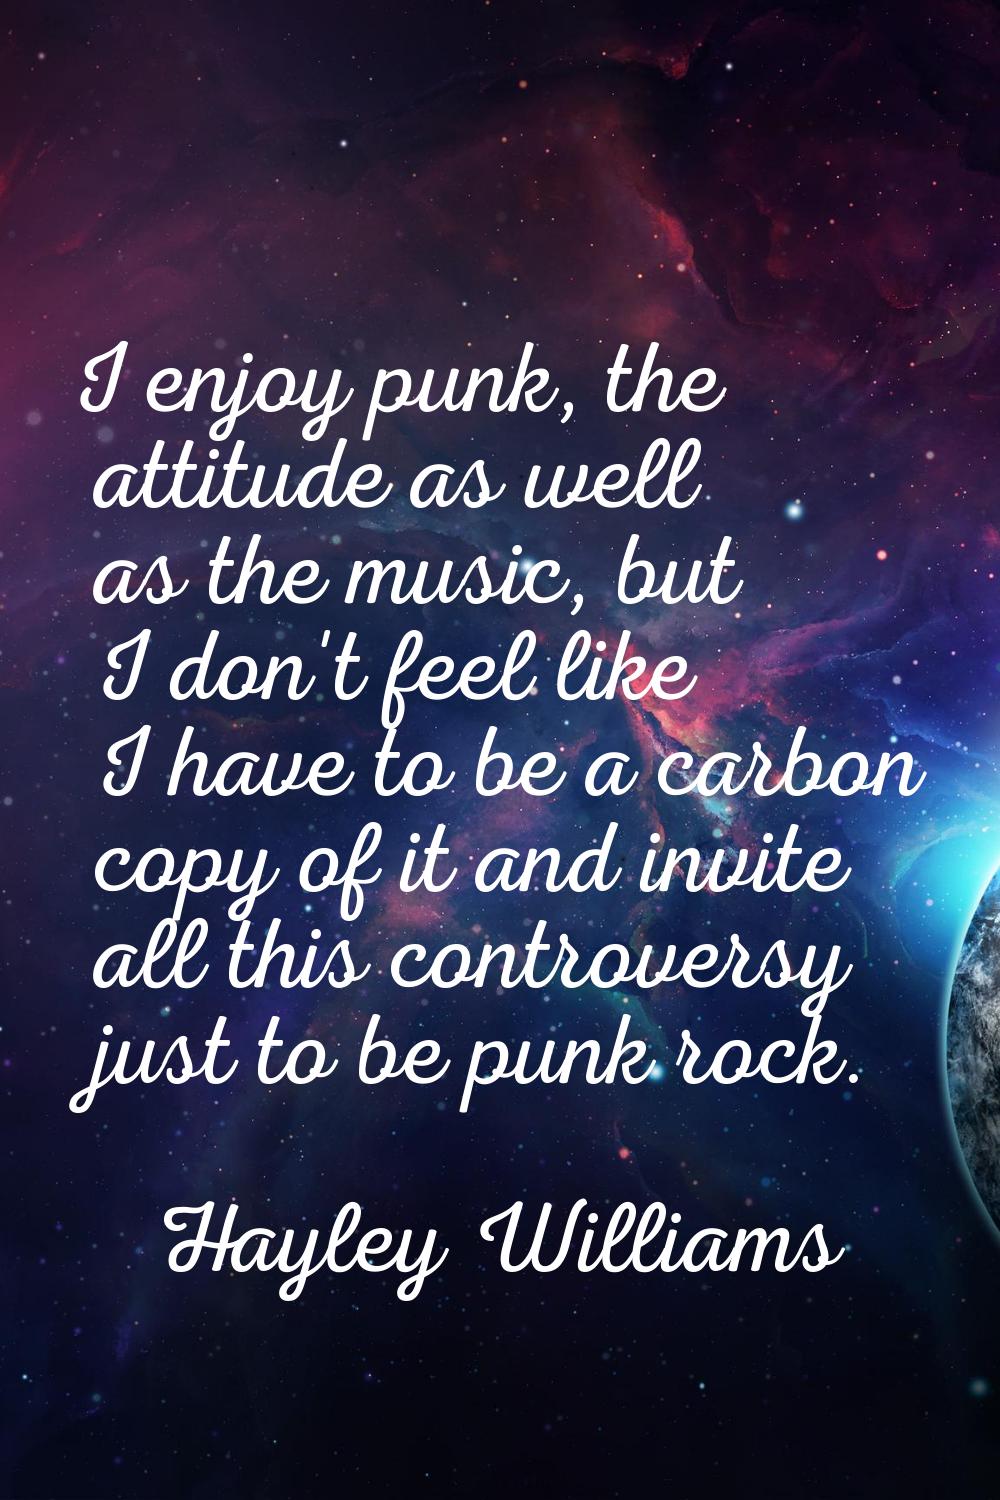 I enjoy punk, the attitude as well as the music, but I don't feel like I have to be a carbon copy o